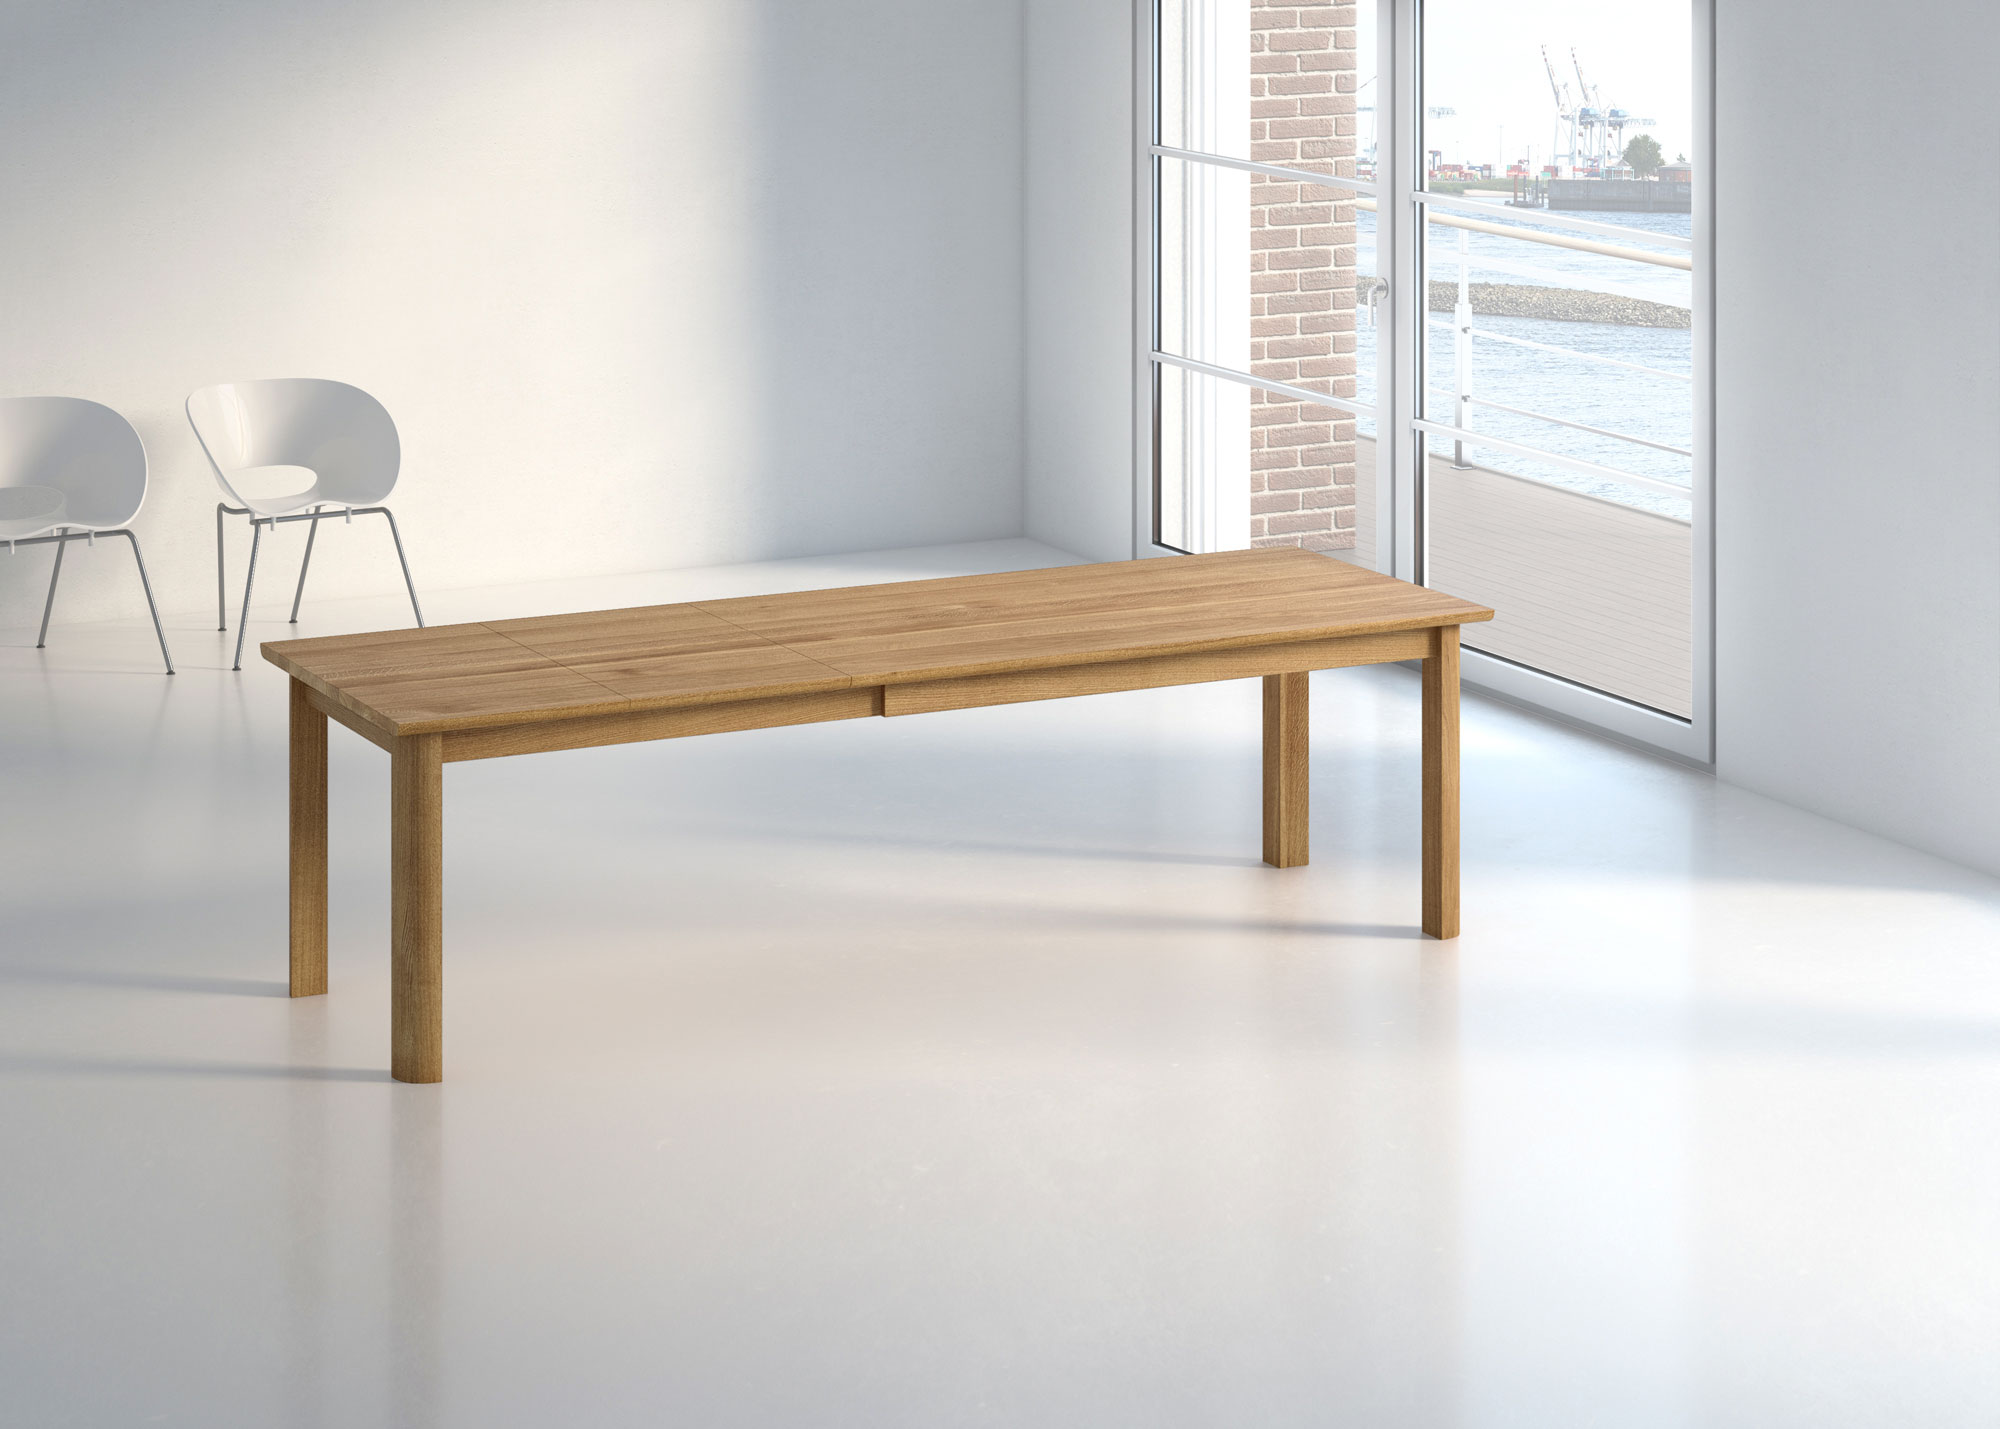 Extendable Dining Table VIVUS BUTTERFLY int-pk custom made in solid wood by vitamin design